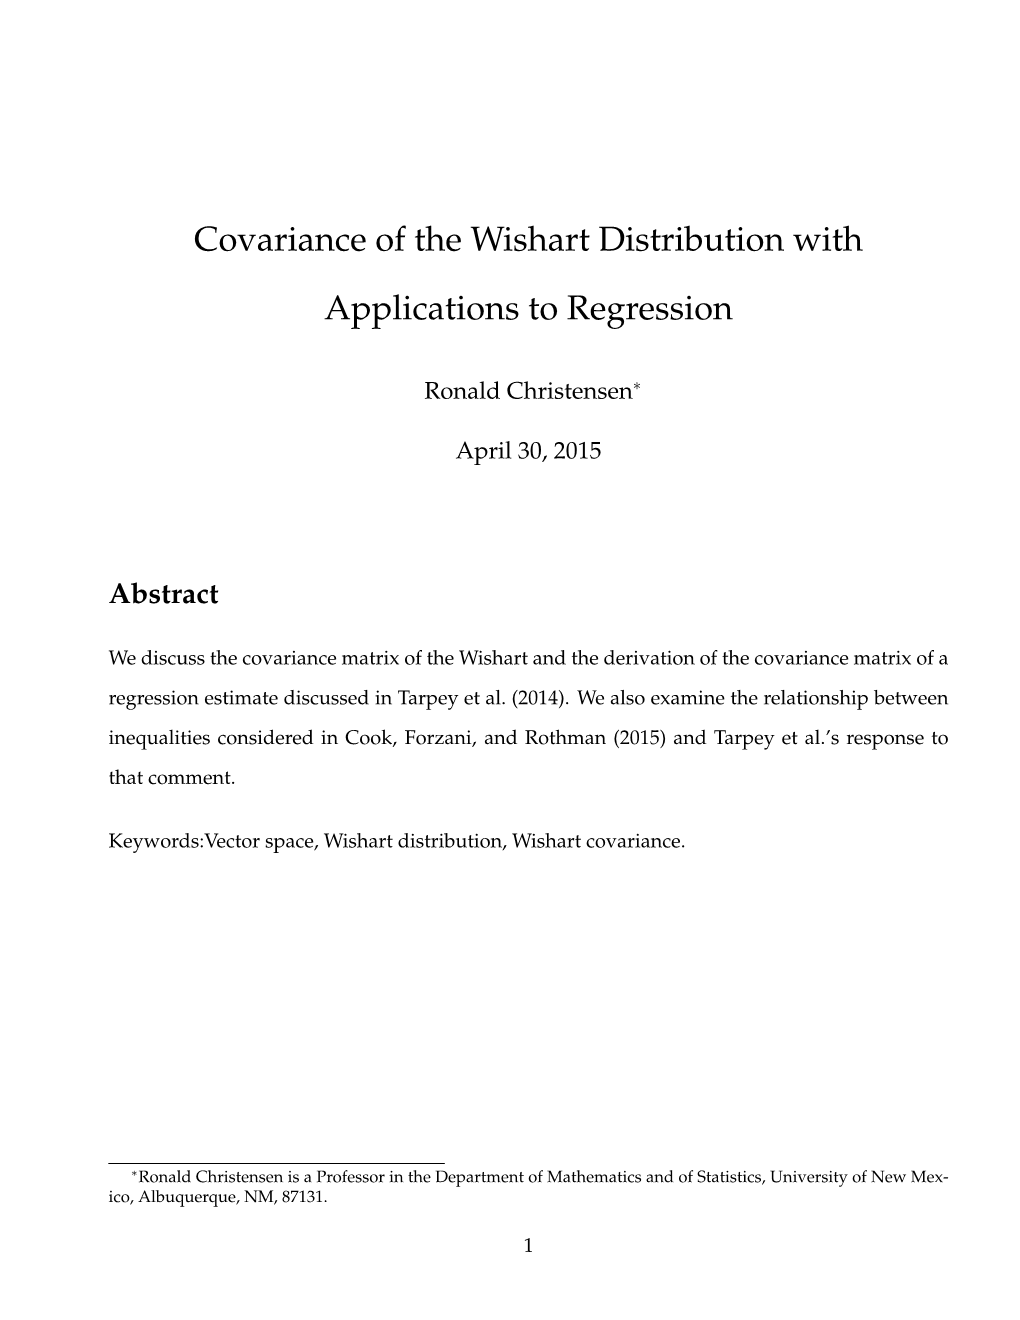 Covariance of the Wishart Distribution with Applications to Regression